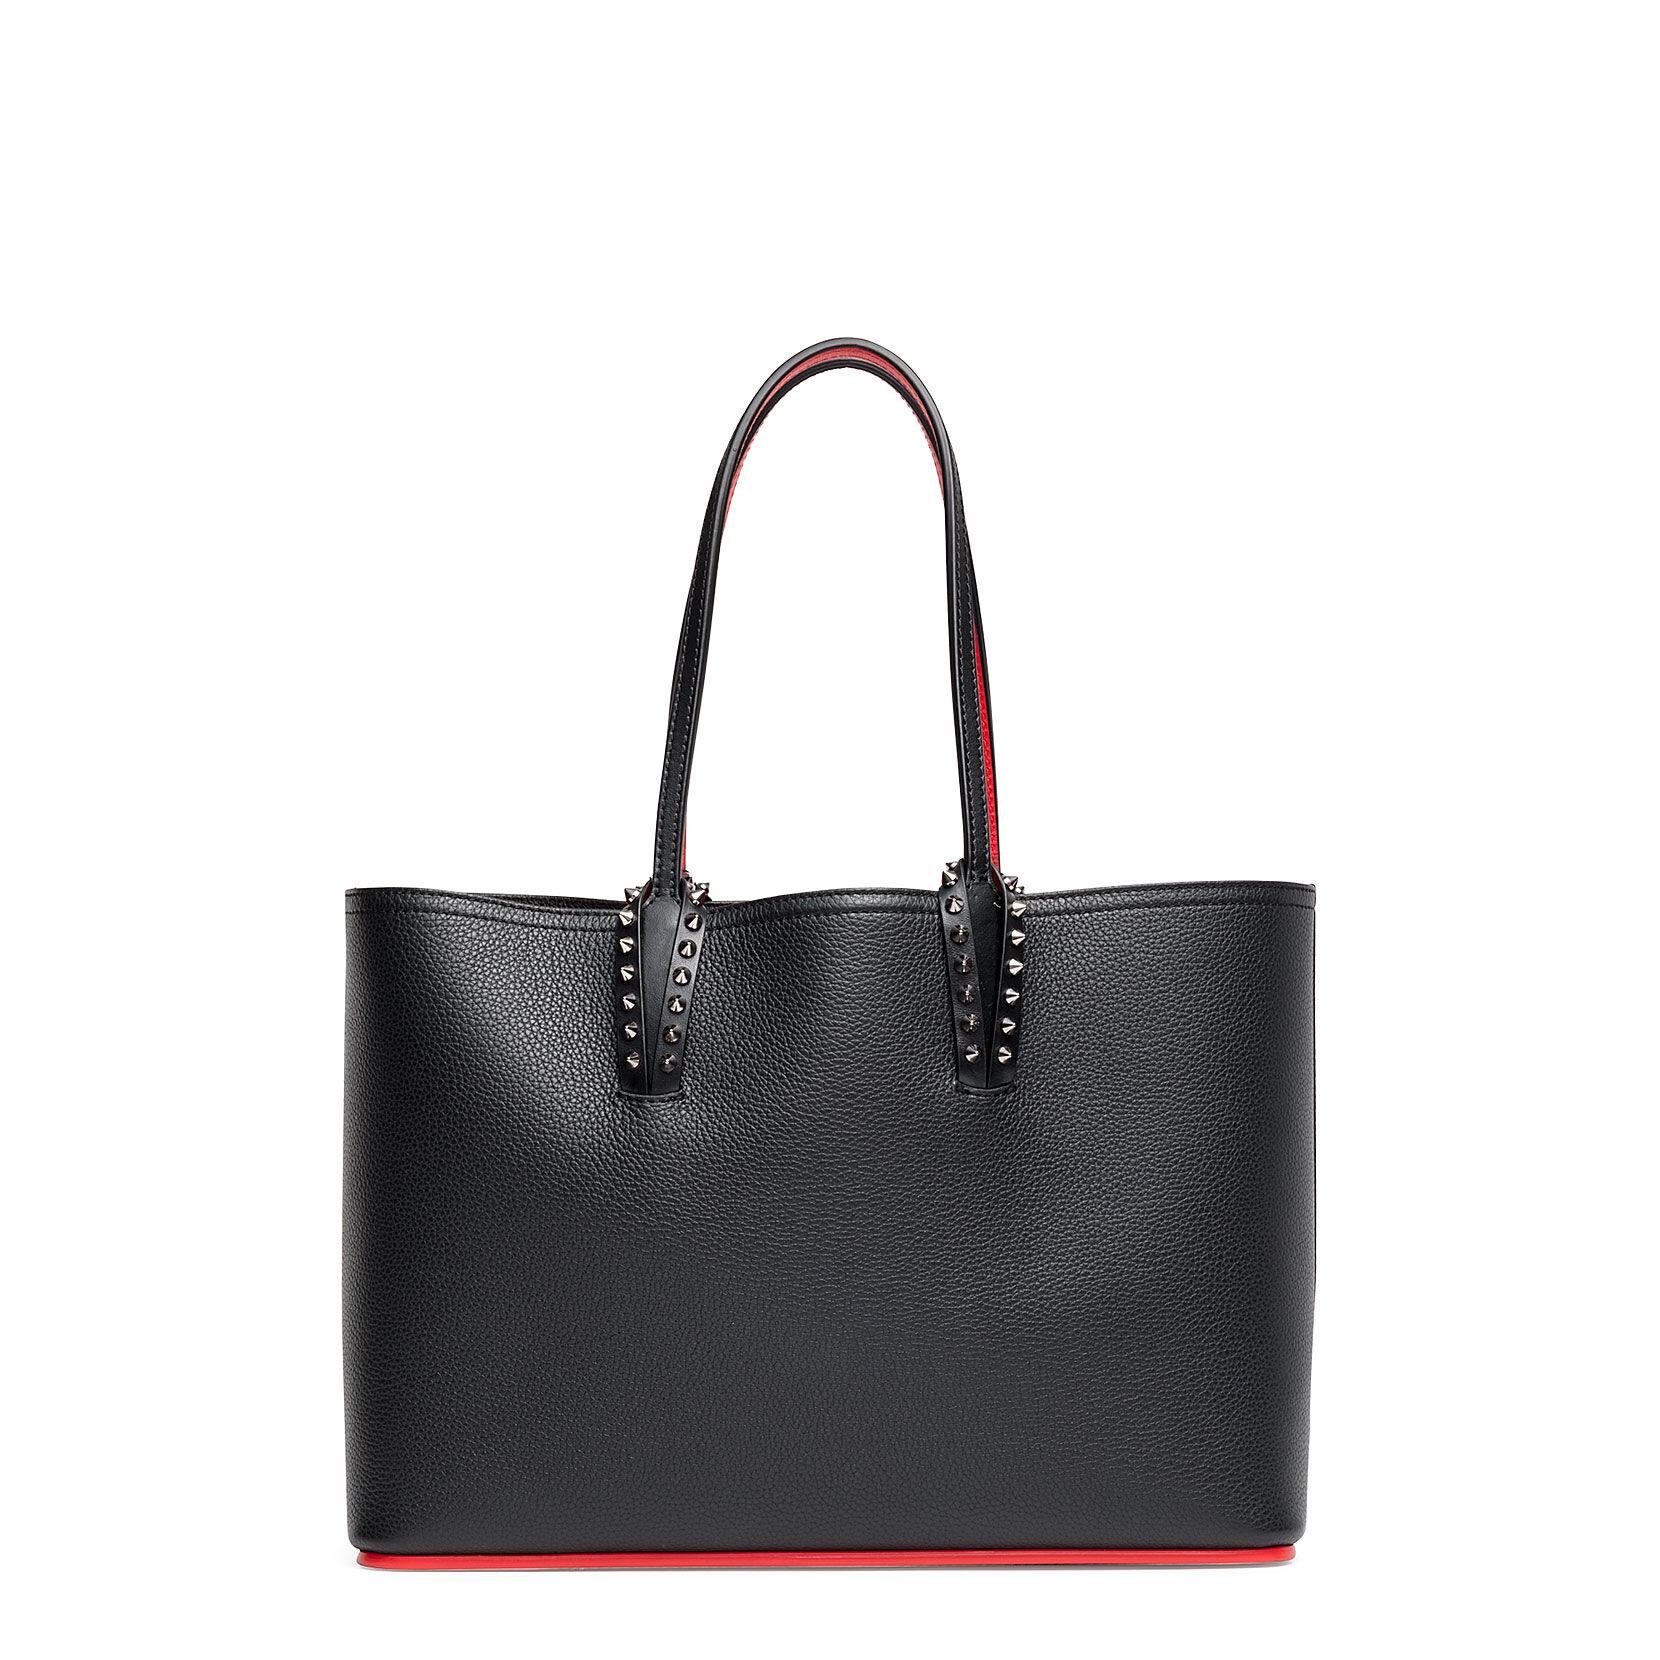 Christian Louboutin Cabata Small Black Leather Tote - Lyst